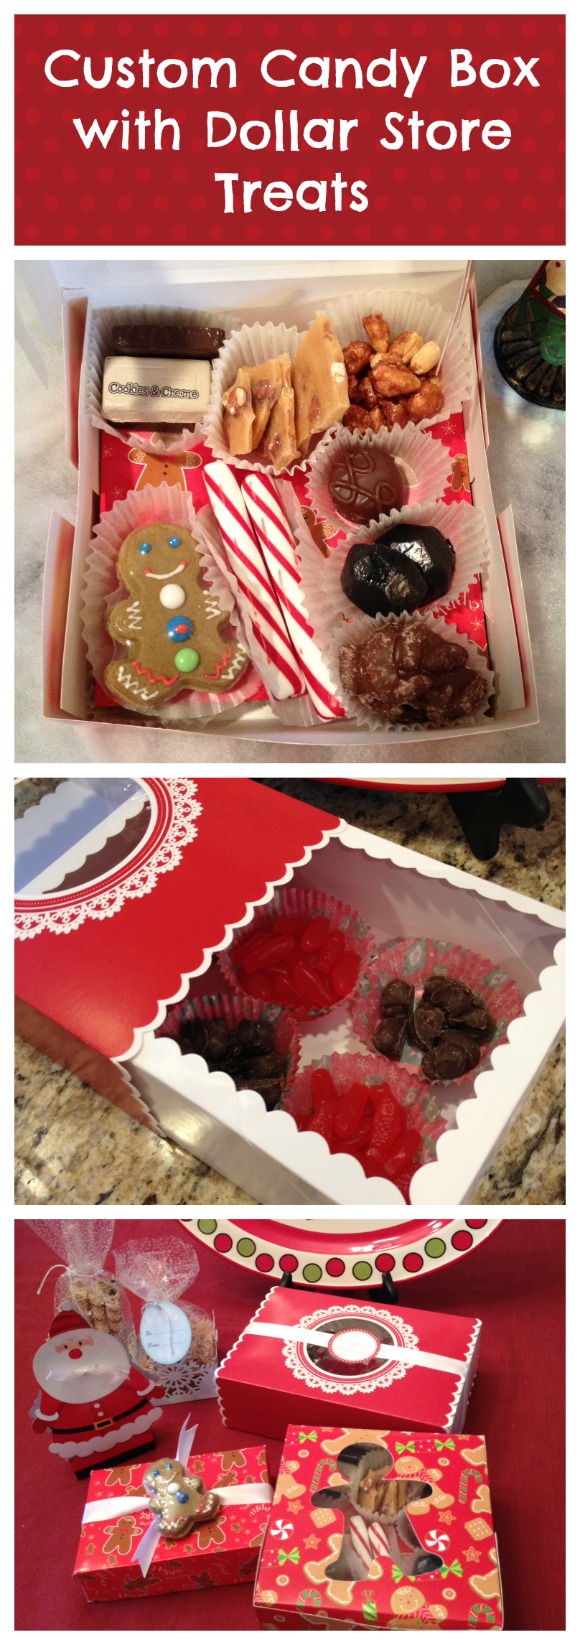 Custom candy gift box with treats from the dollar store - why didn't I think of that?